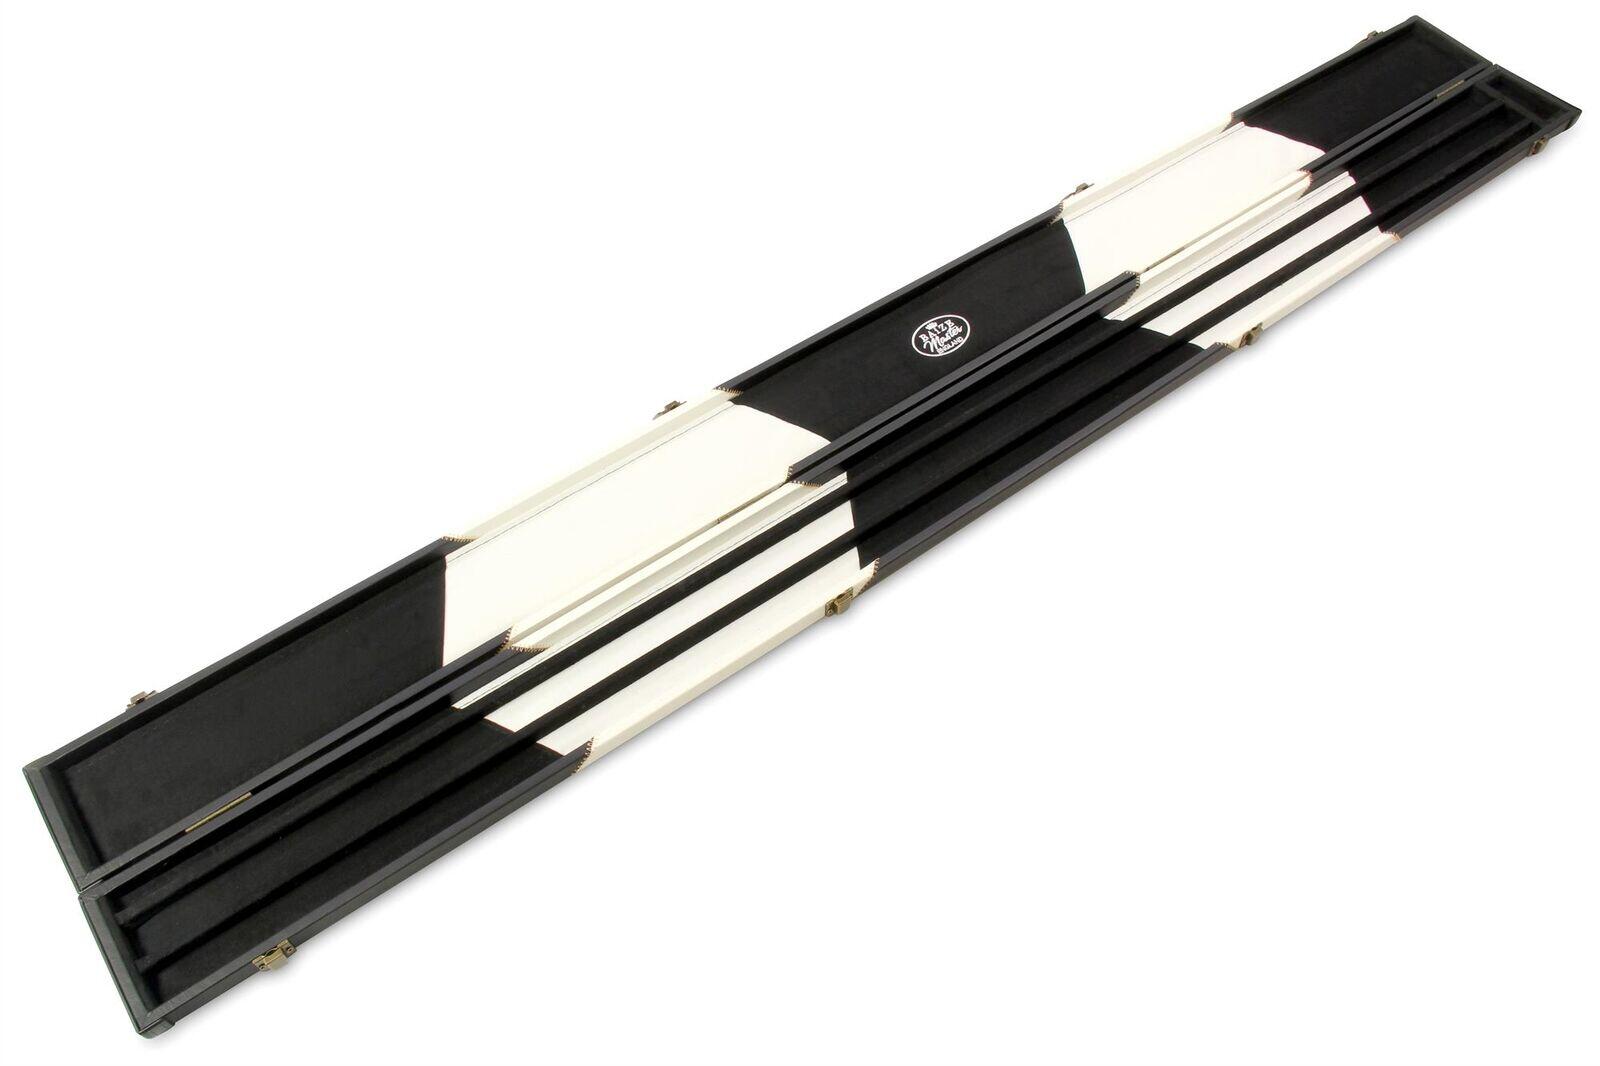 Baize Master 1 Piece WIDE WHITE ARROW Snooker Pool Cue Case - Holds 3 Cues 2/7